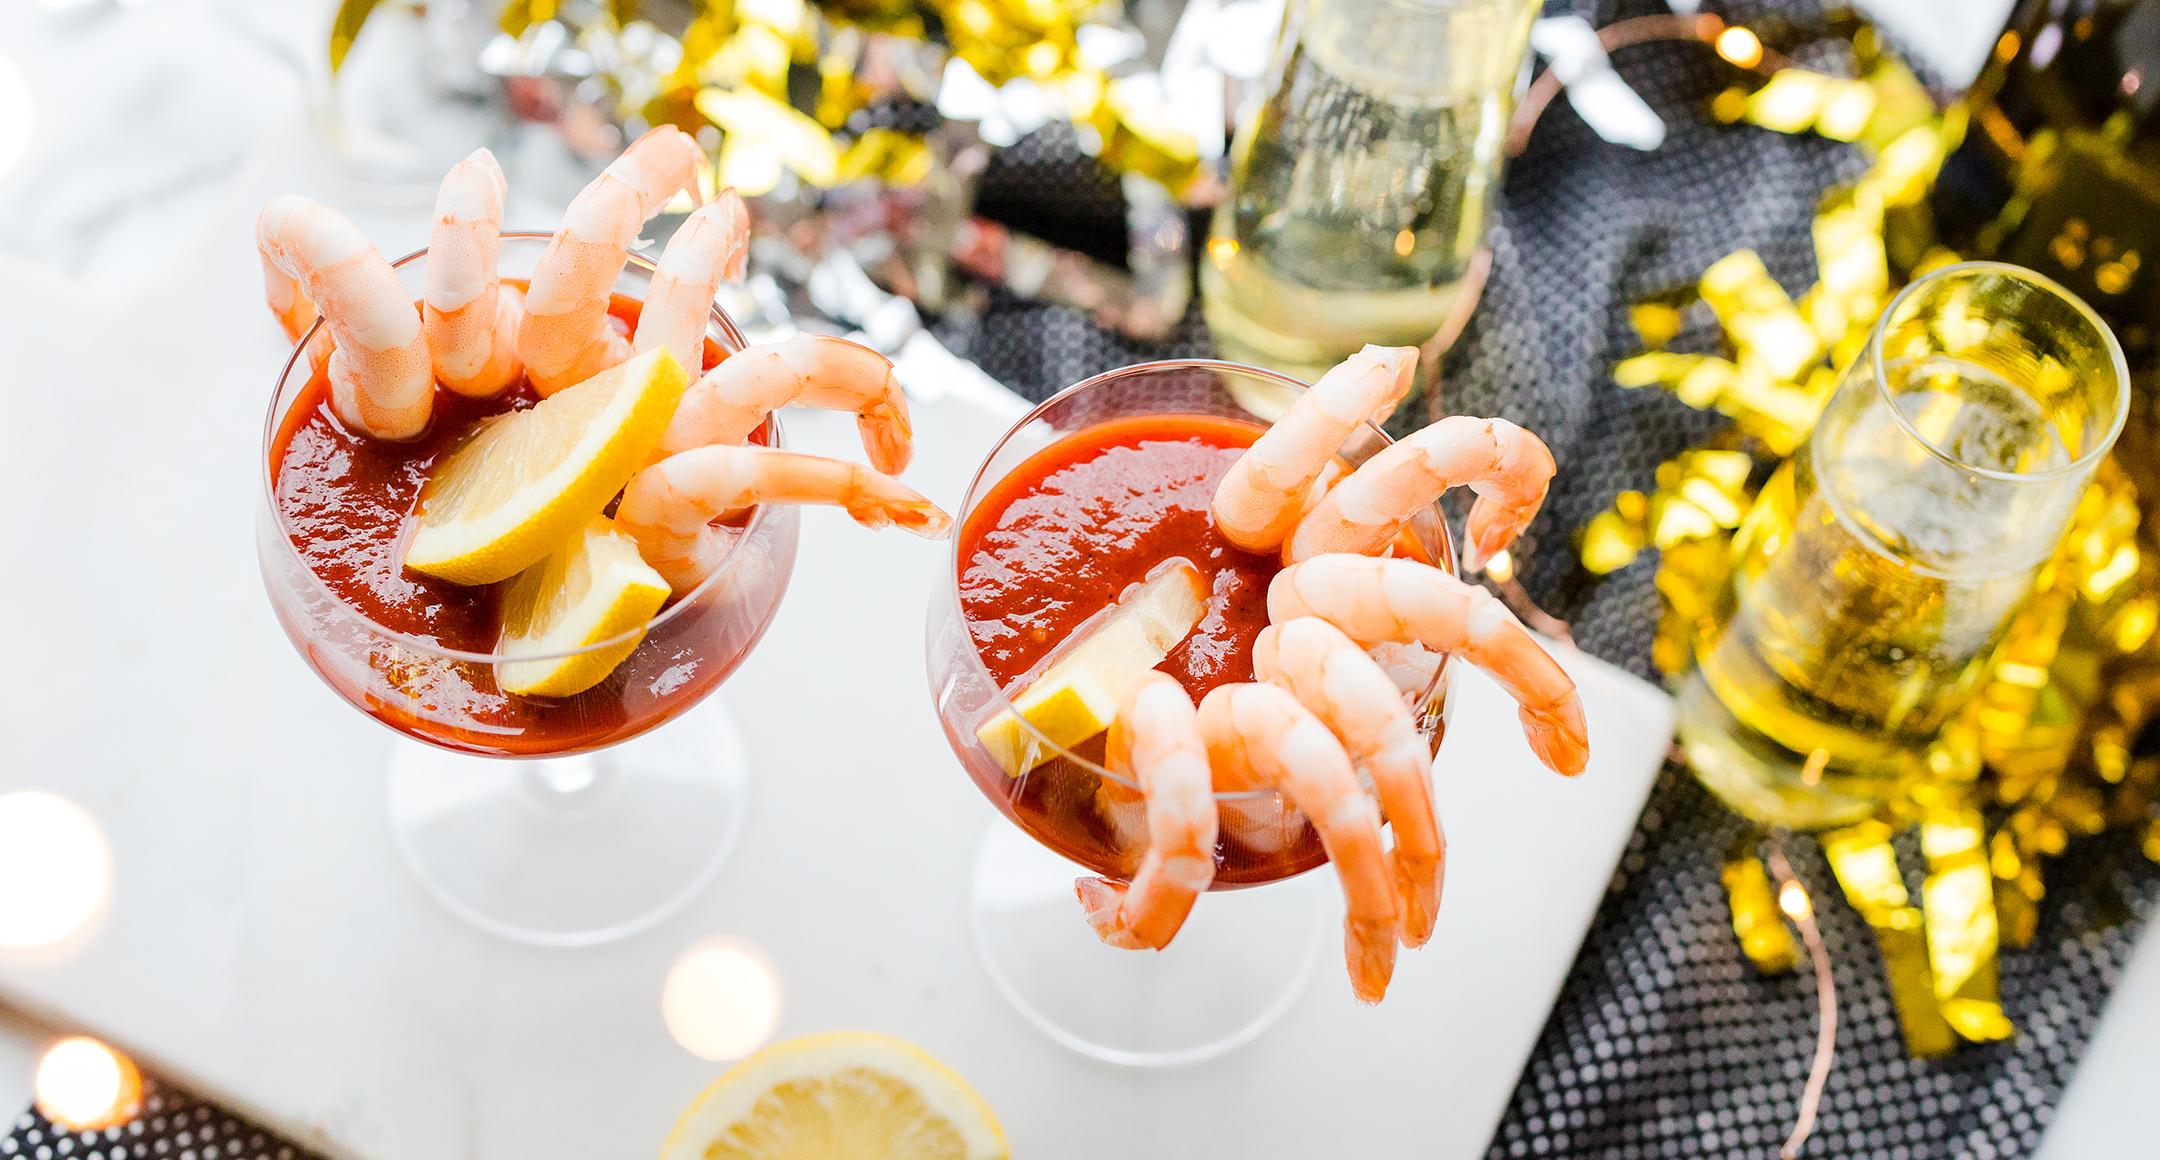 A shrimp cocktail appetizer with ready-to-eat shrimp lining a glass filled with cocktail sauce.